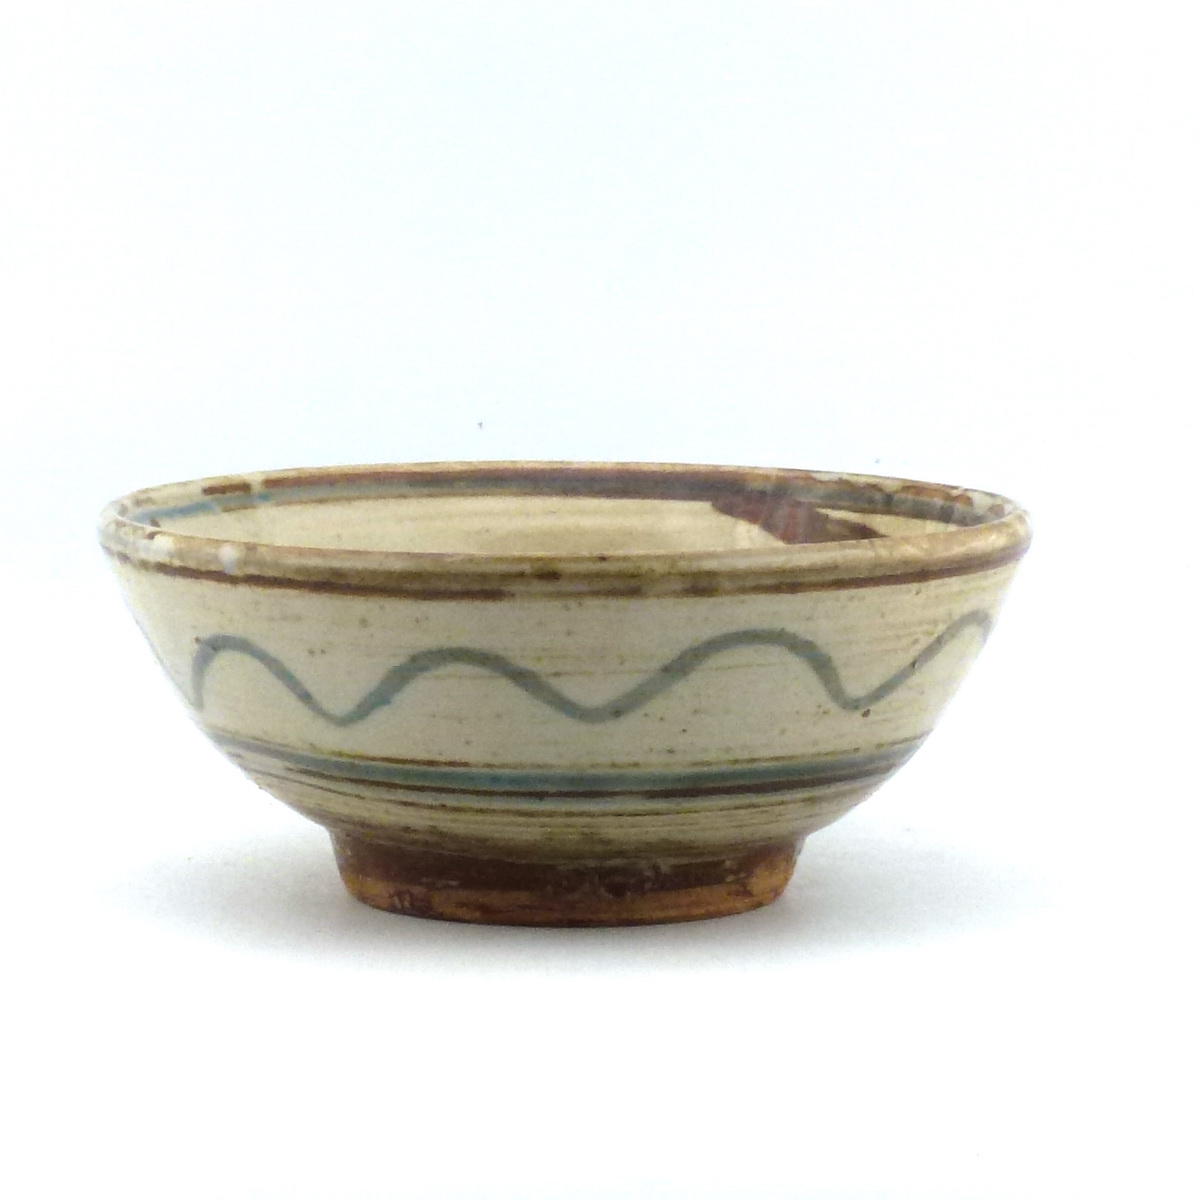 Footed stoneware bowl